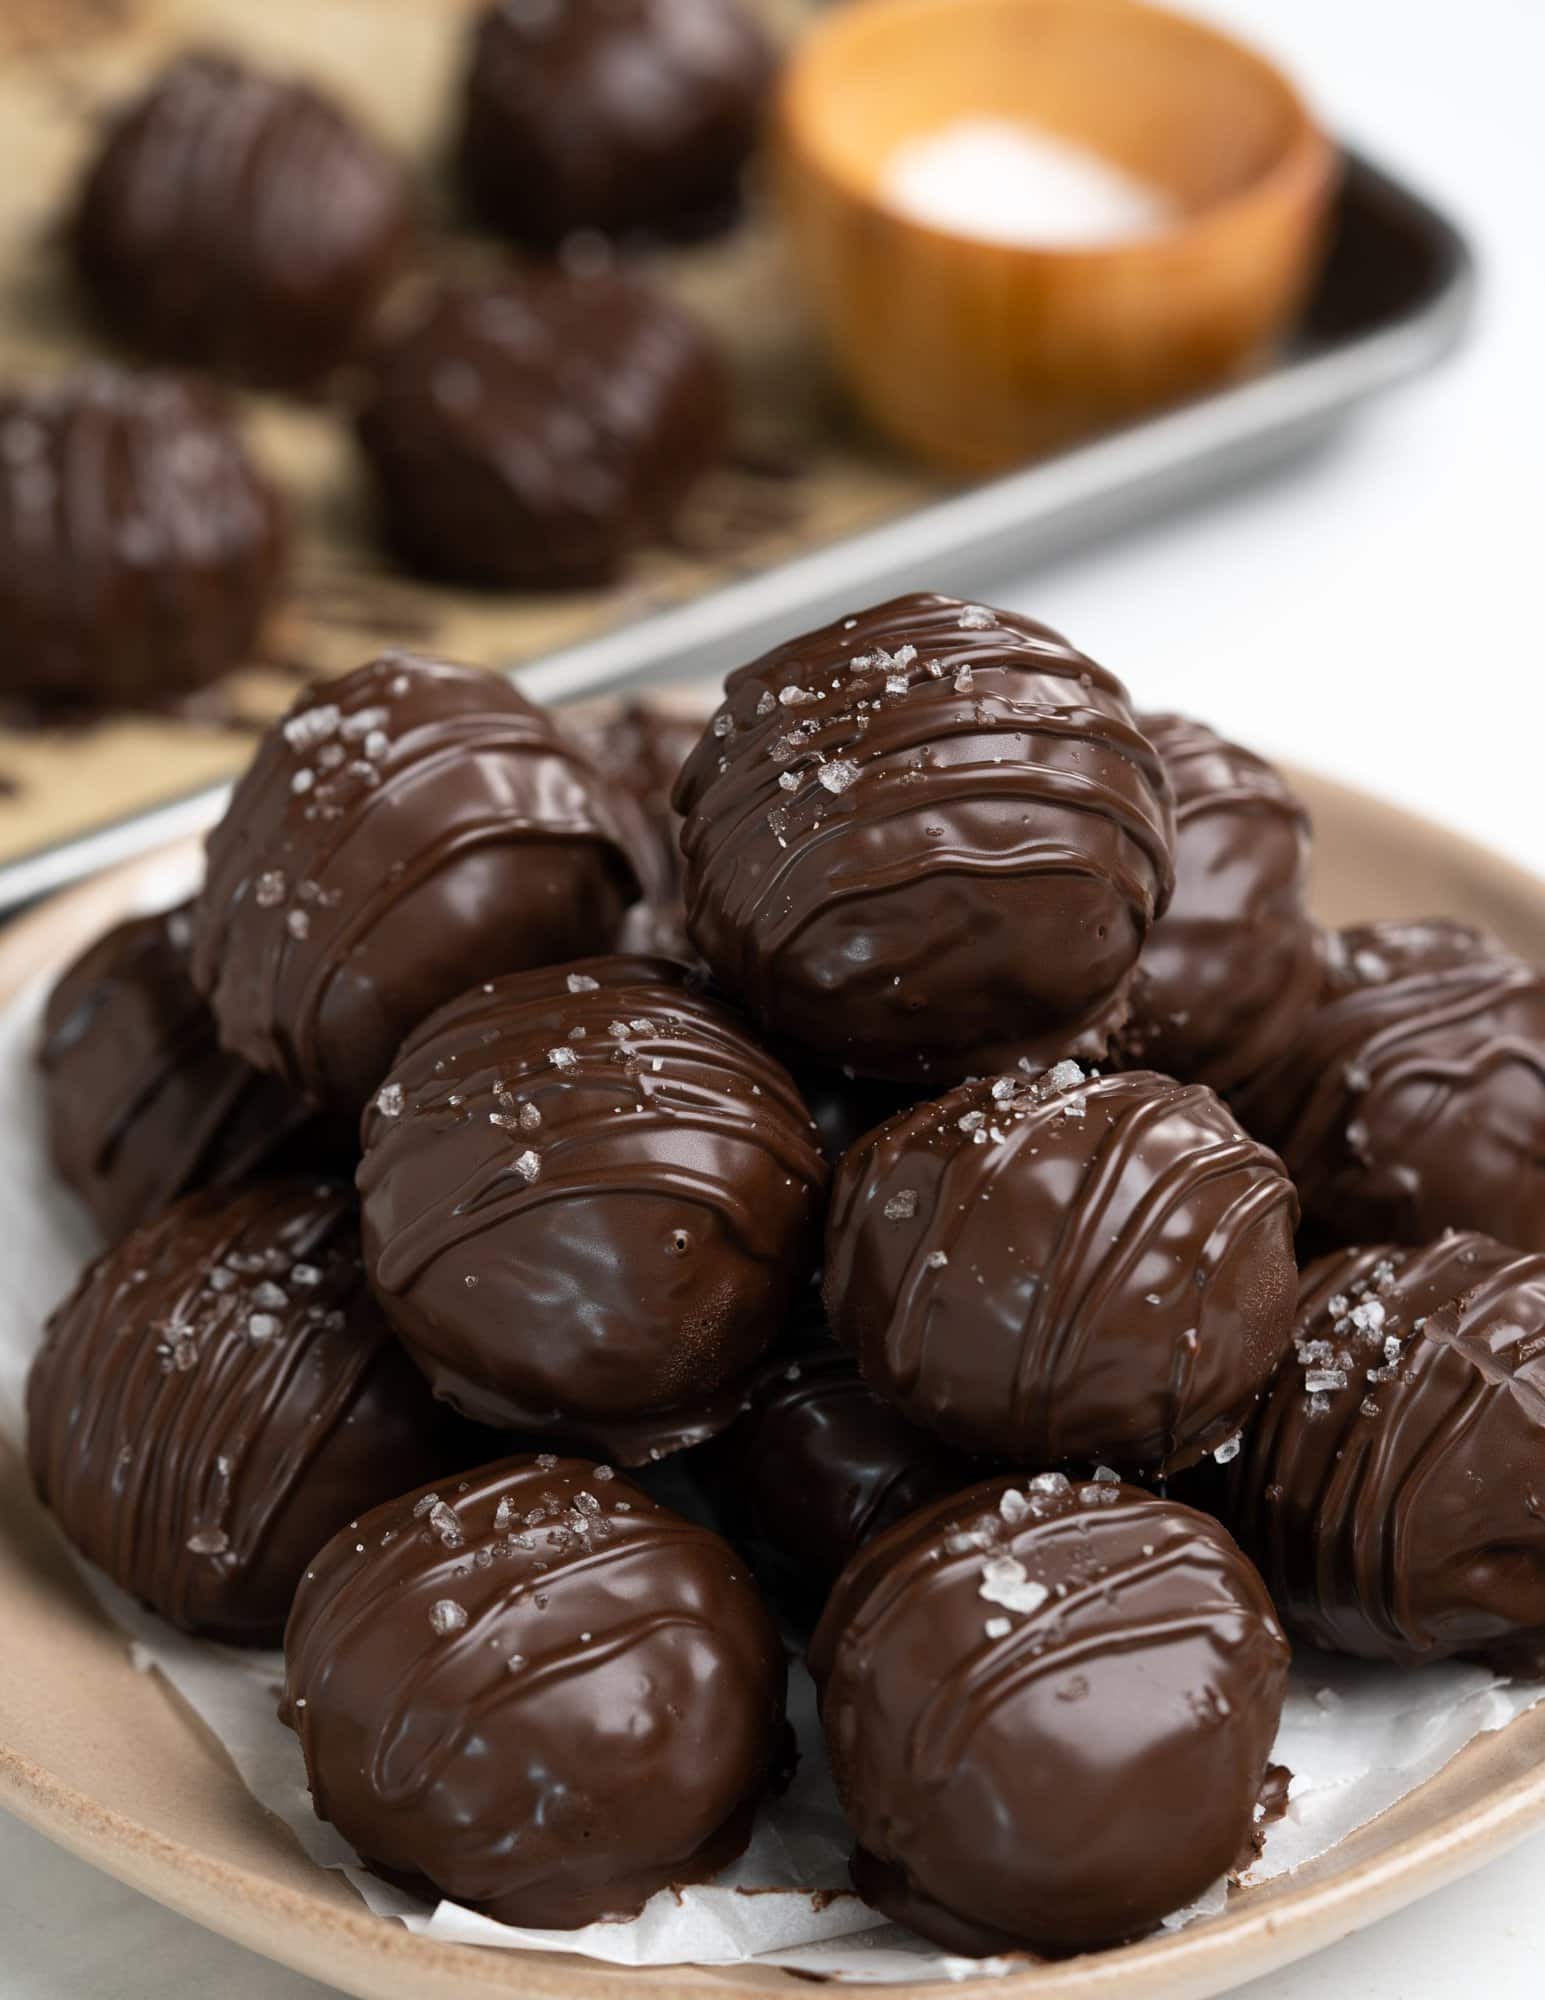 These no-bake Peanut butter balls are covered with dark chocolate and have crunch in every bite from the puffed rice cereal. Easy and fun to make peanut butter balls are perfect sweet treats for kids and adults alike. 